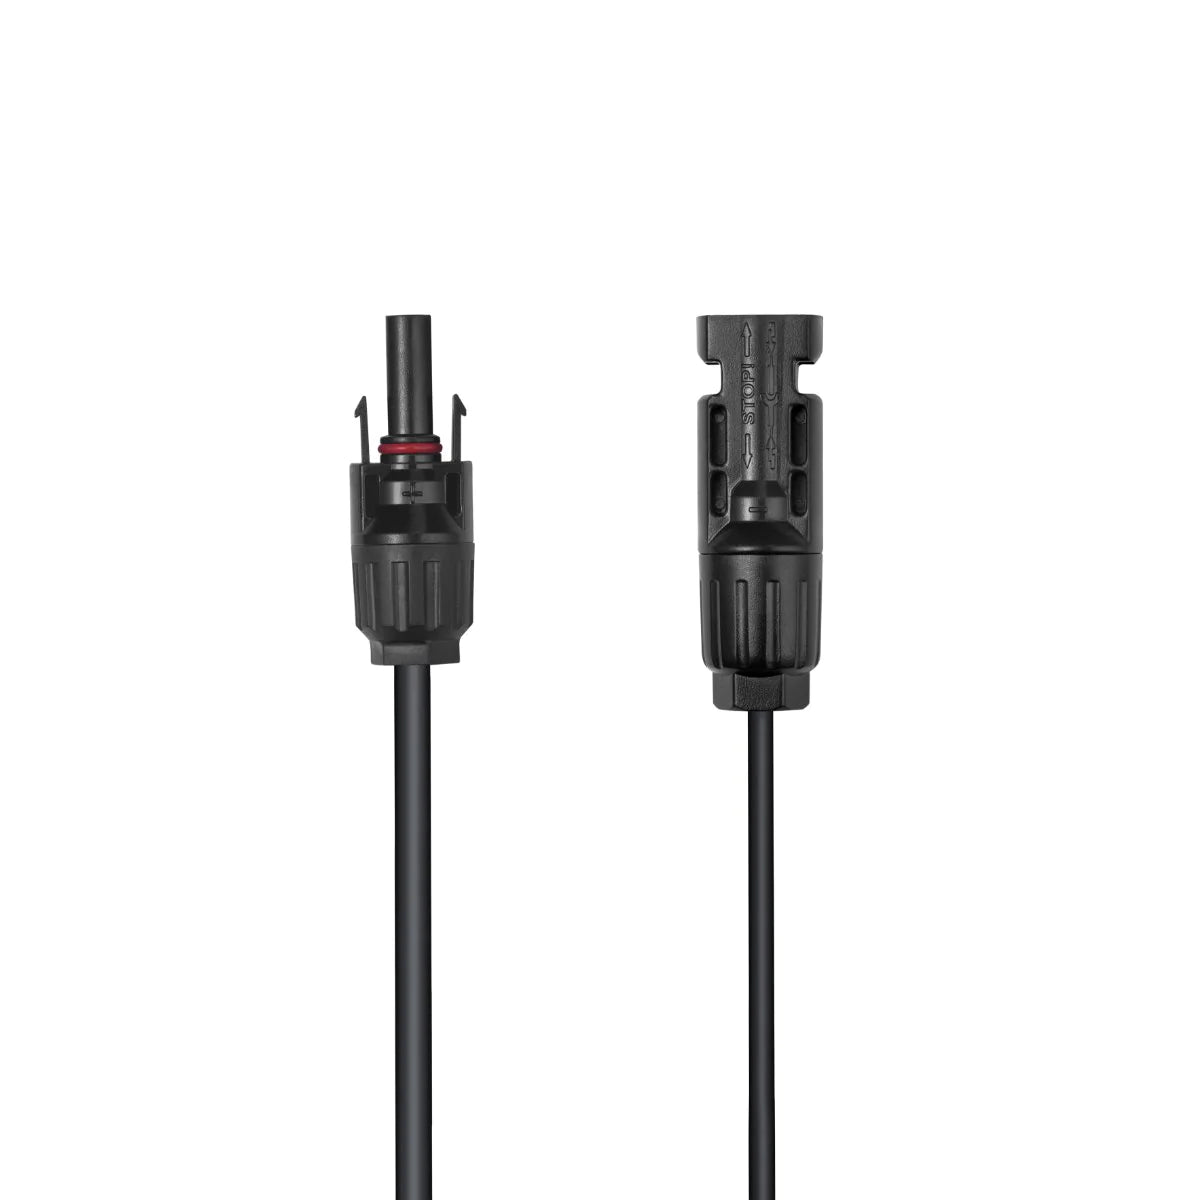 Solar MC4 Parallel Connection Cable - Solar Generators and Power Stations Plus